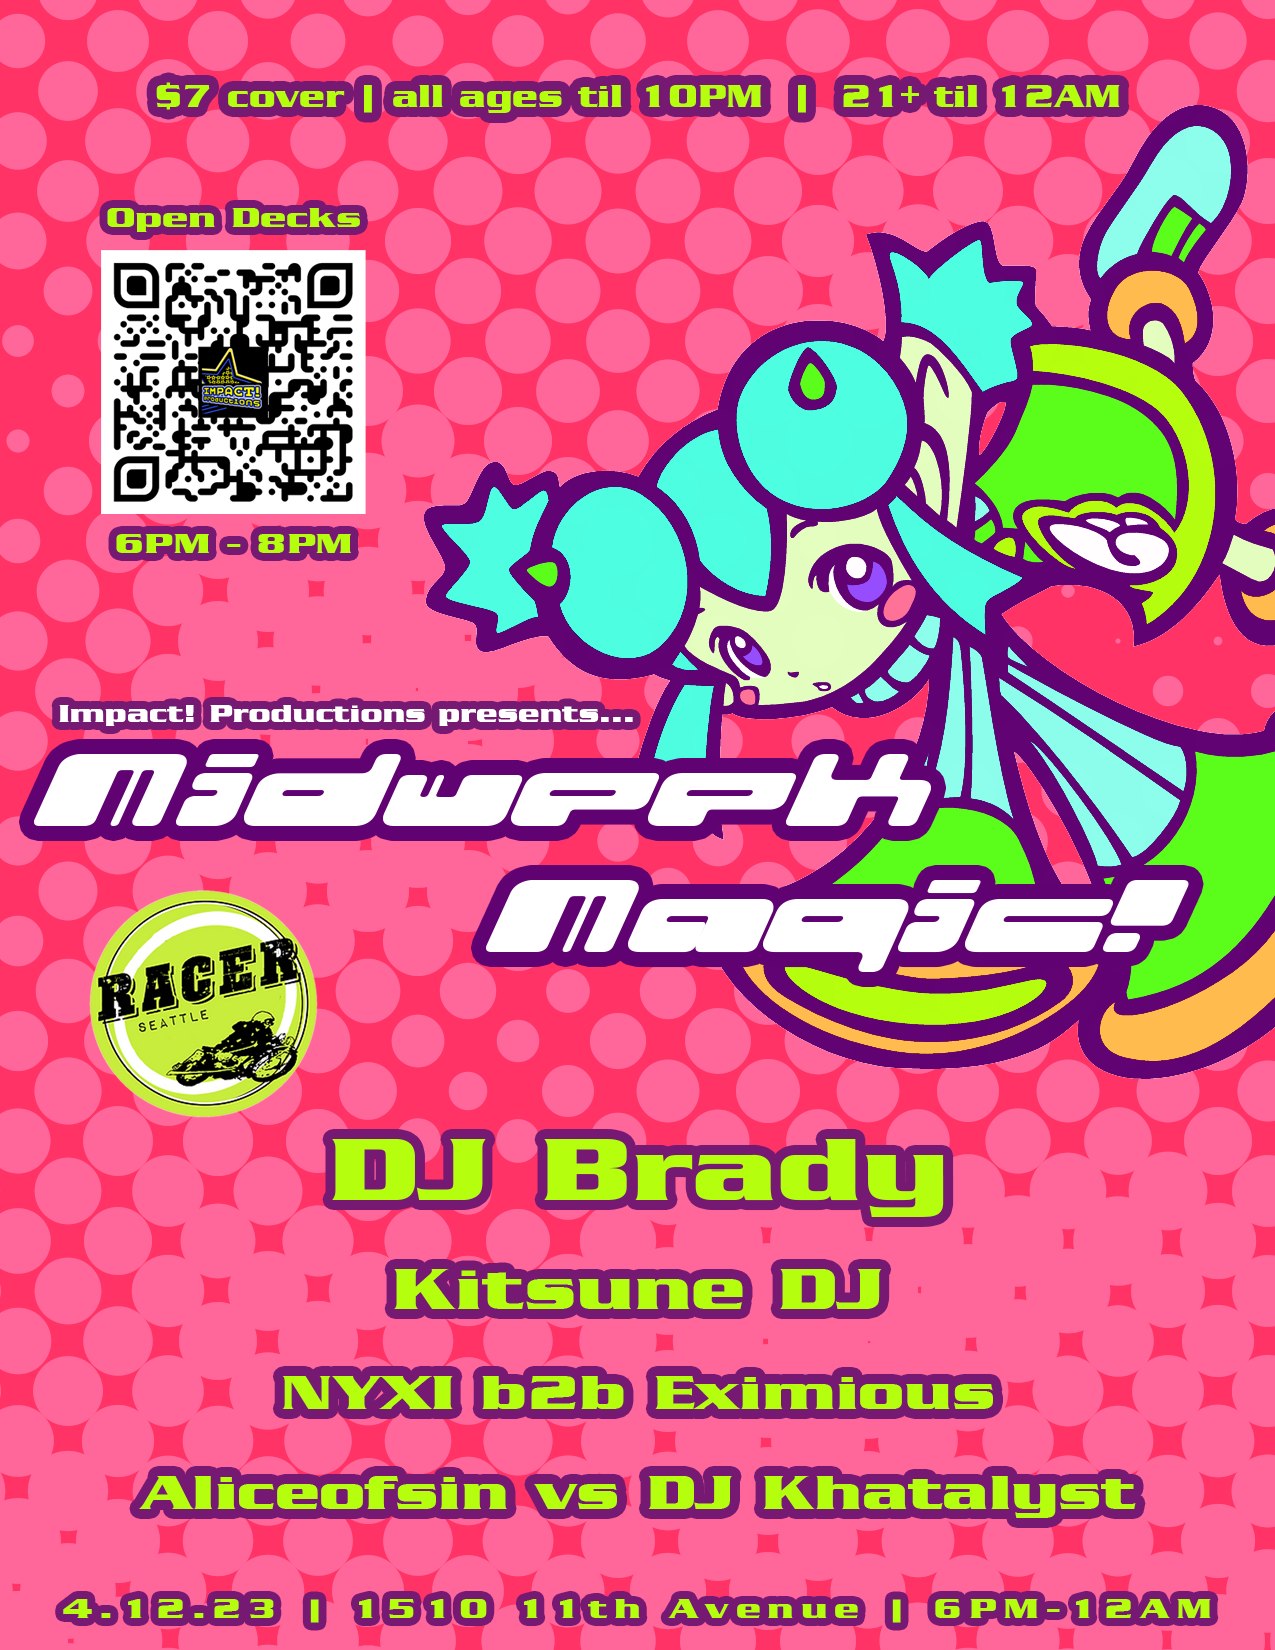 MIDWEEK MAGIC 4-12-23 WITH DJ Brady! AT CAFE RACER BY IMPACT! PRODUCTIONS SEATTLE POST FLYER